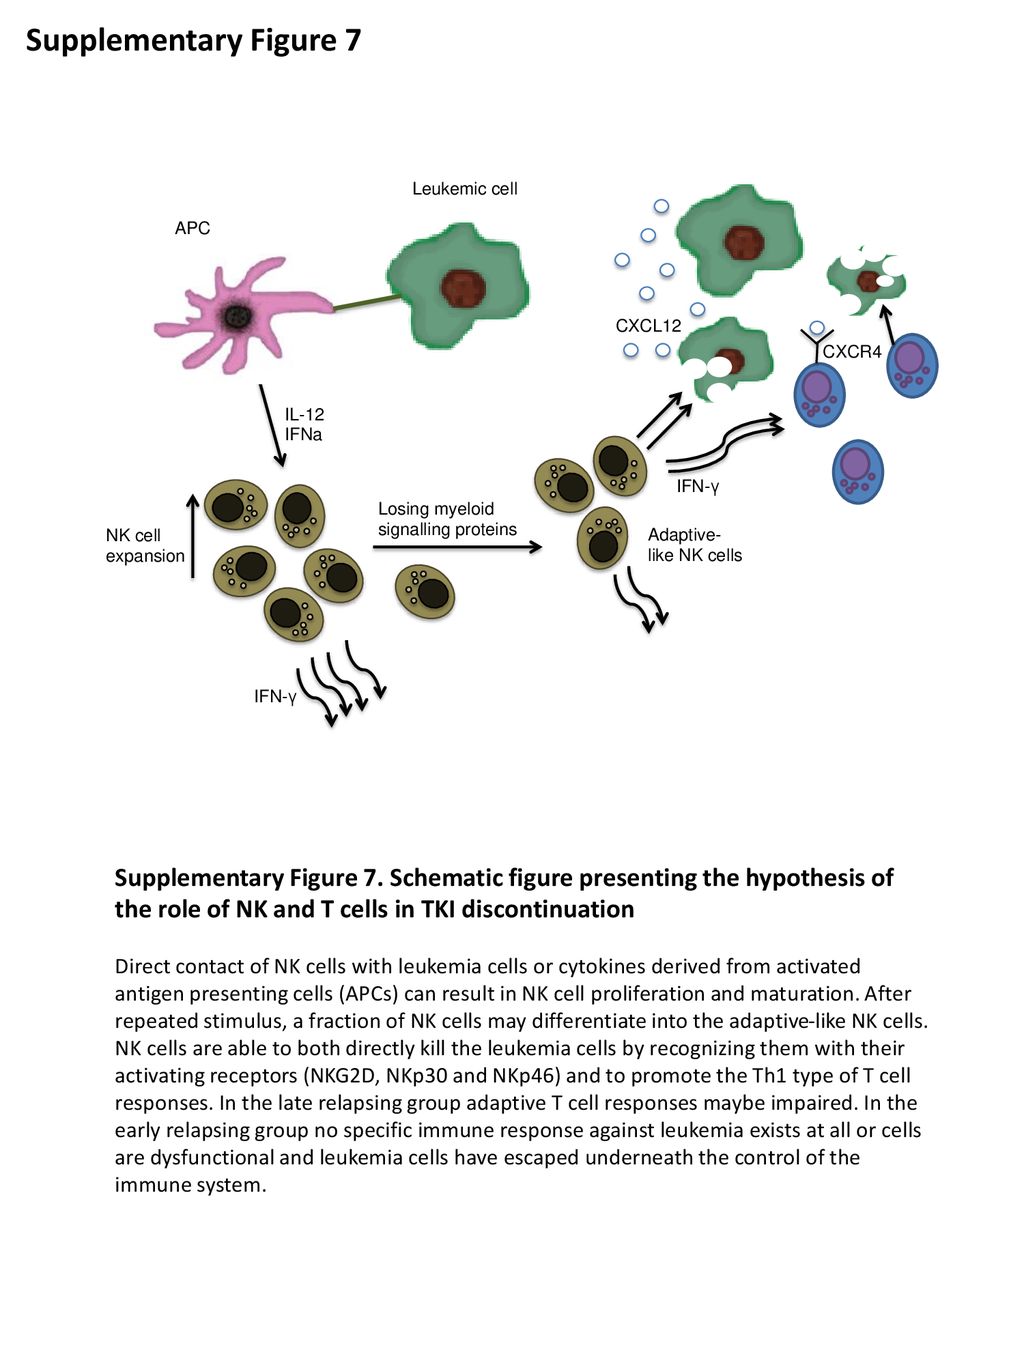 Supplementary Figure 7 Supplementary Figure 7. Schematic figure presenting the hypothesis of the role of NK and T cells in TKI discontinuation.